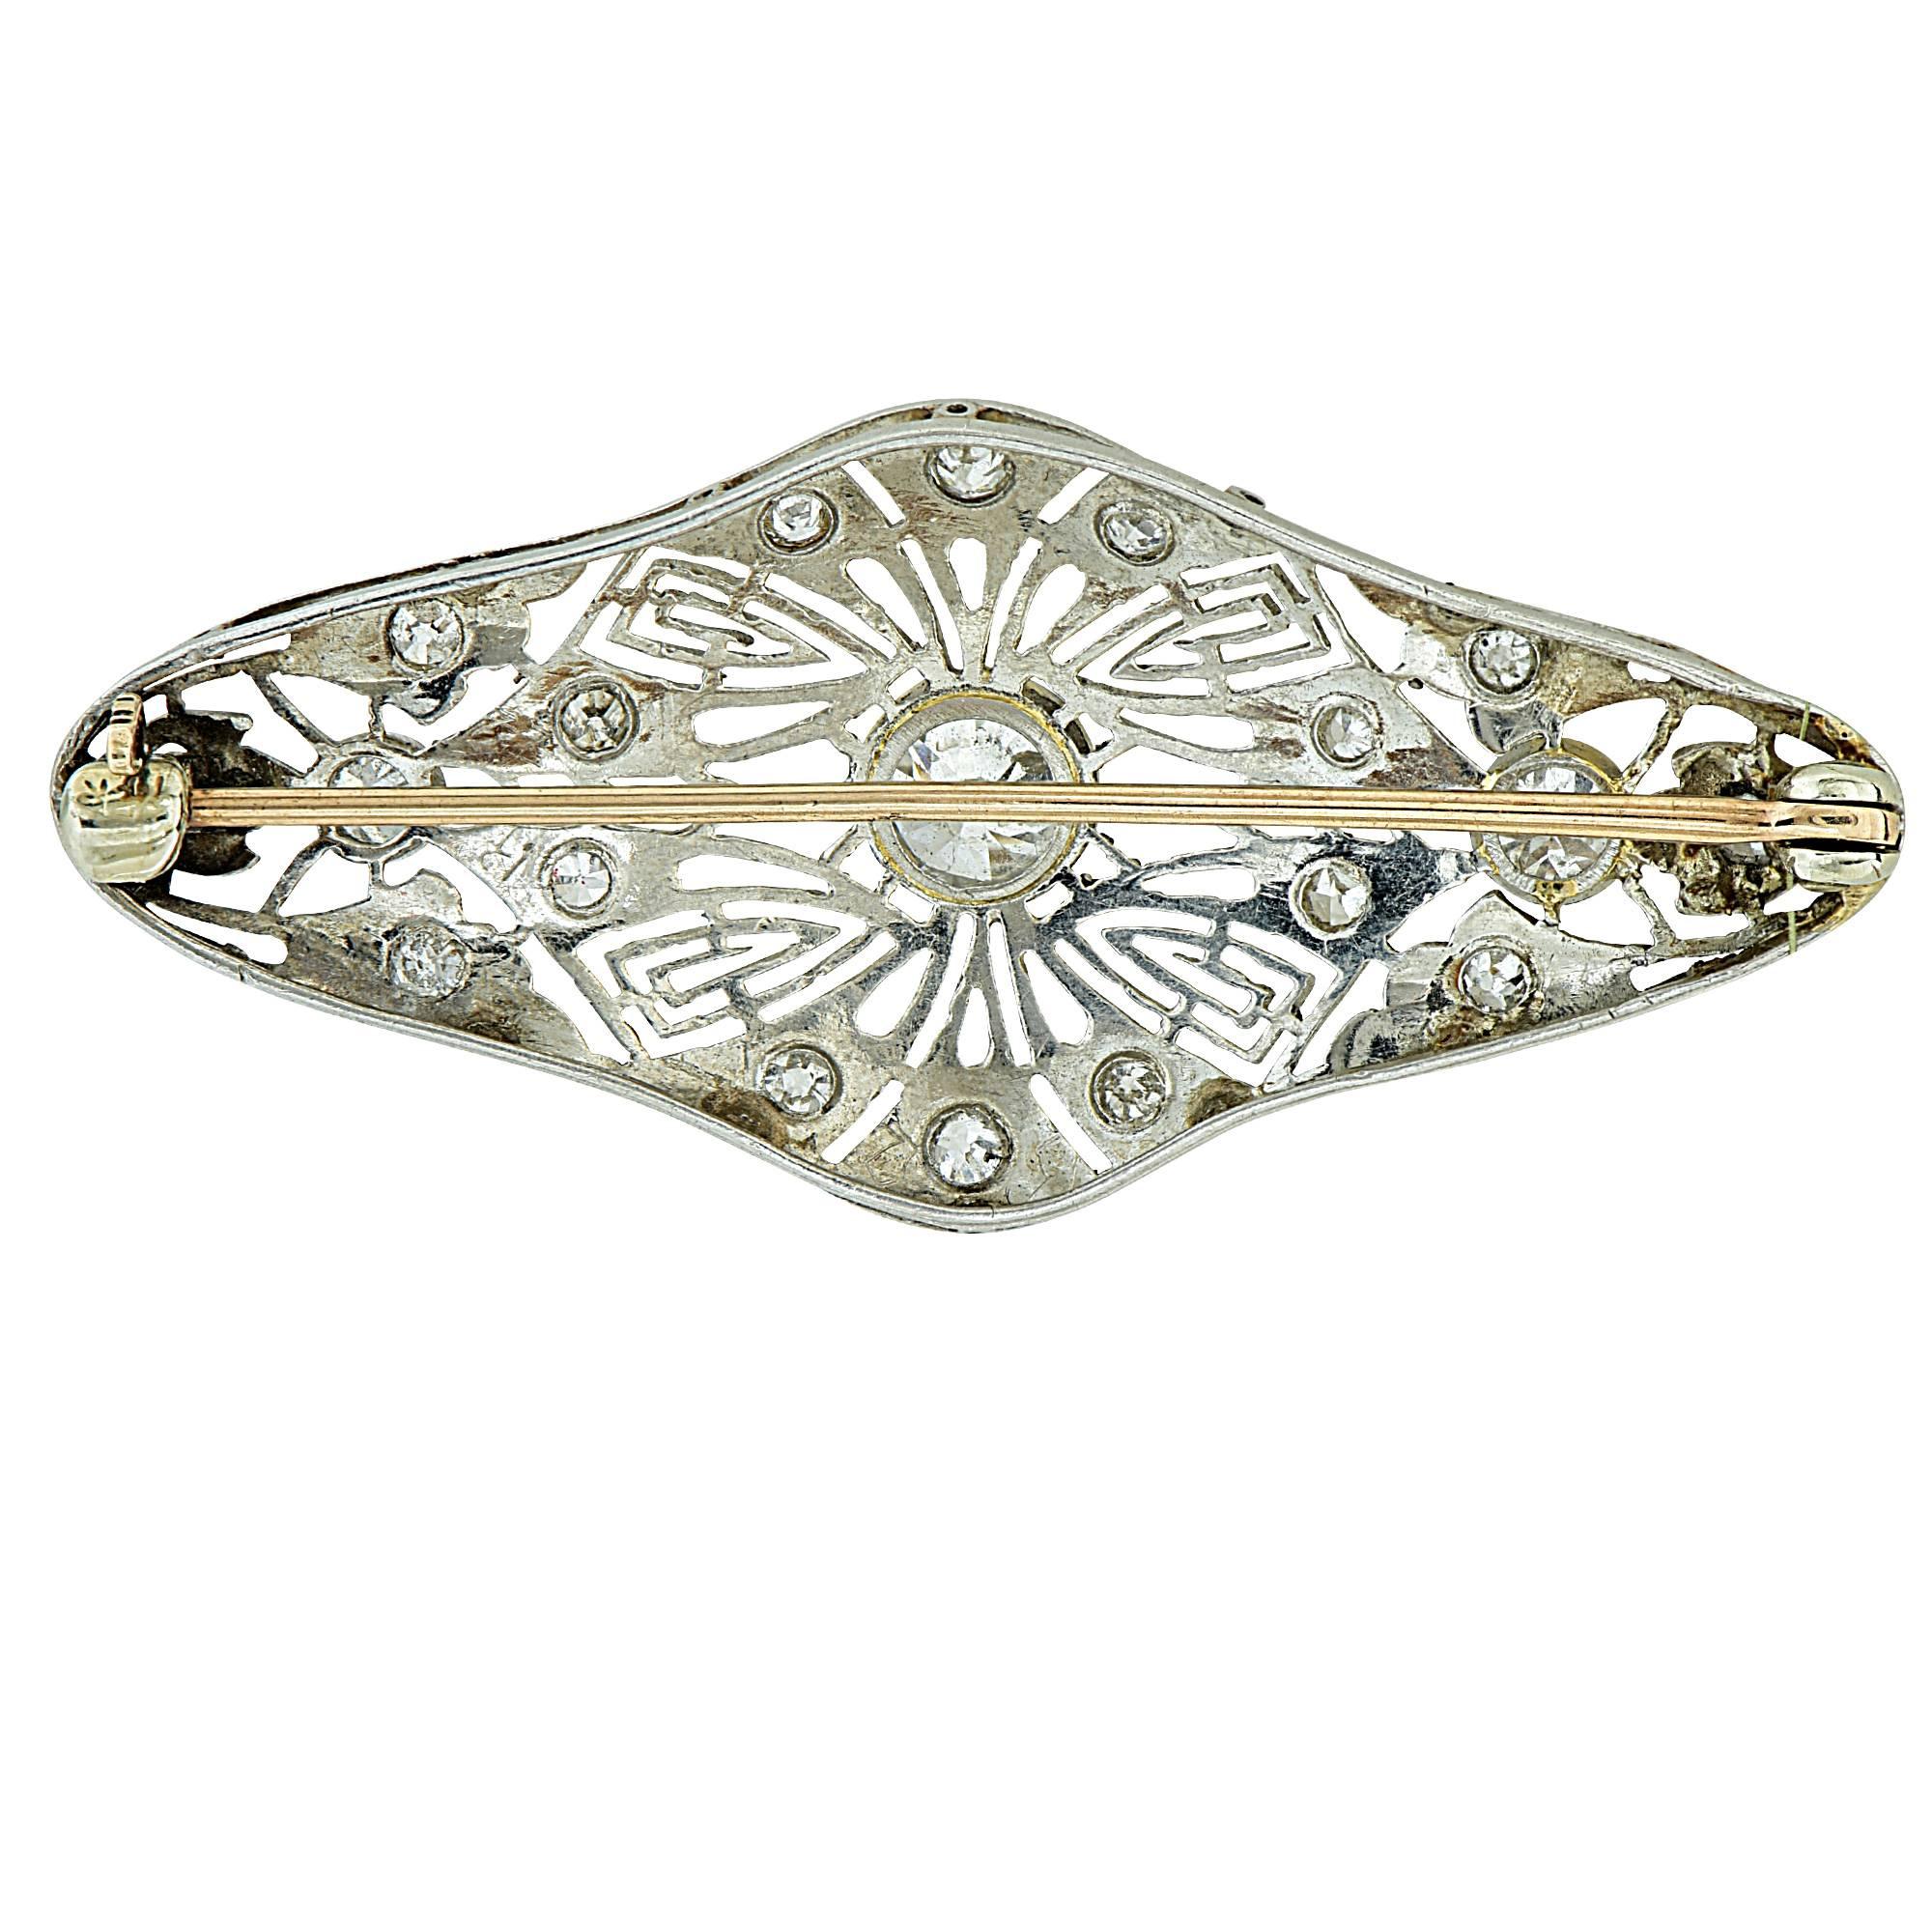 This beautiful Art Deco diamond pin features 23 Old European Cut diamonds that equal approximately 1.75 carat total weight. The brooch is crafted in platinum, and weighs 6.4 grams. 